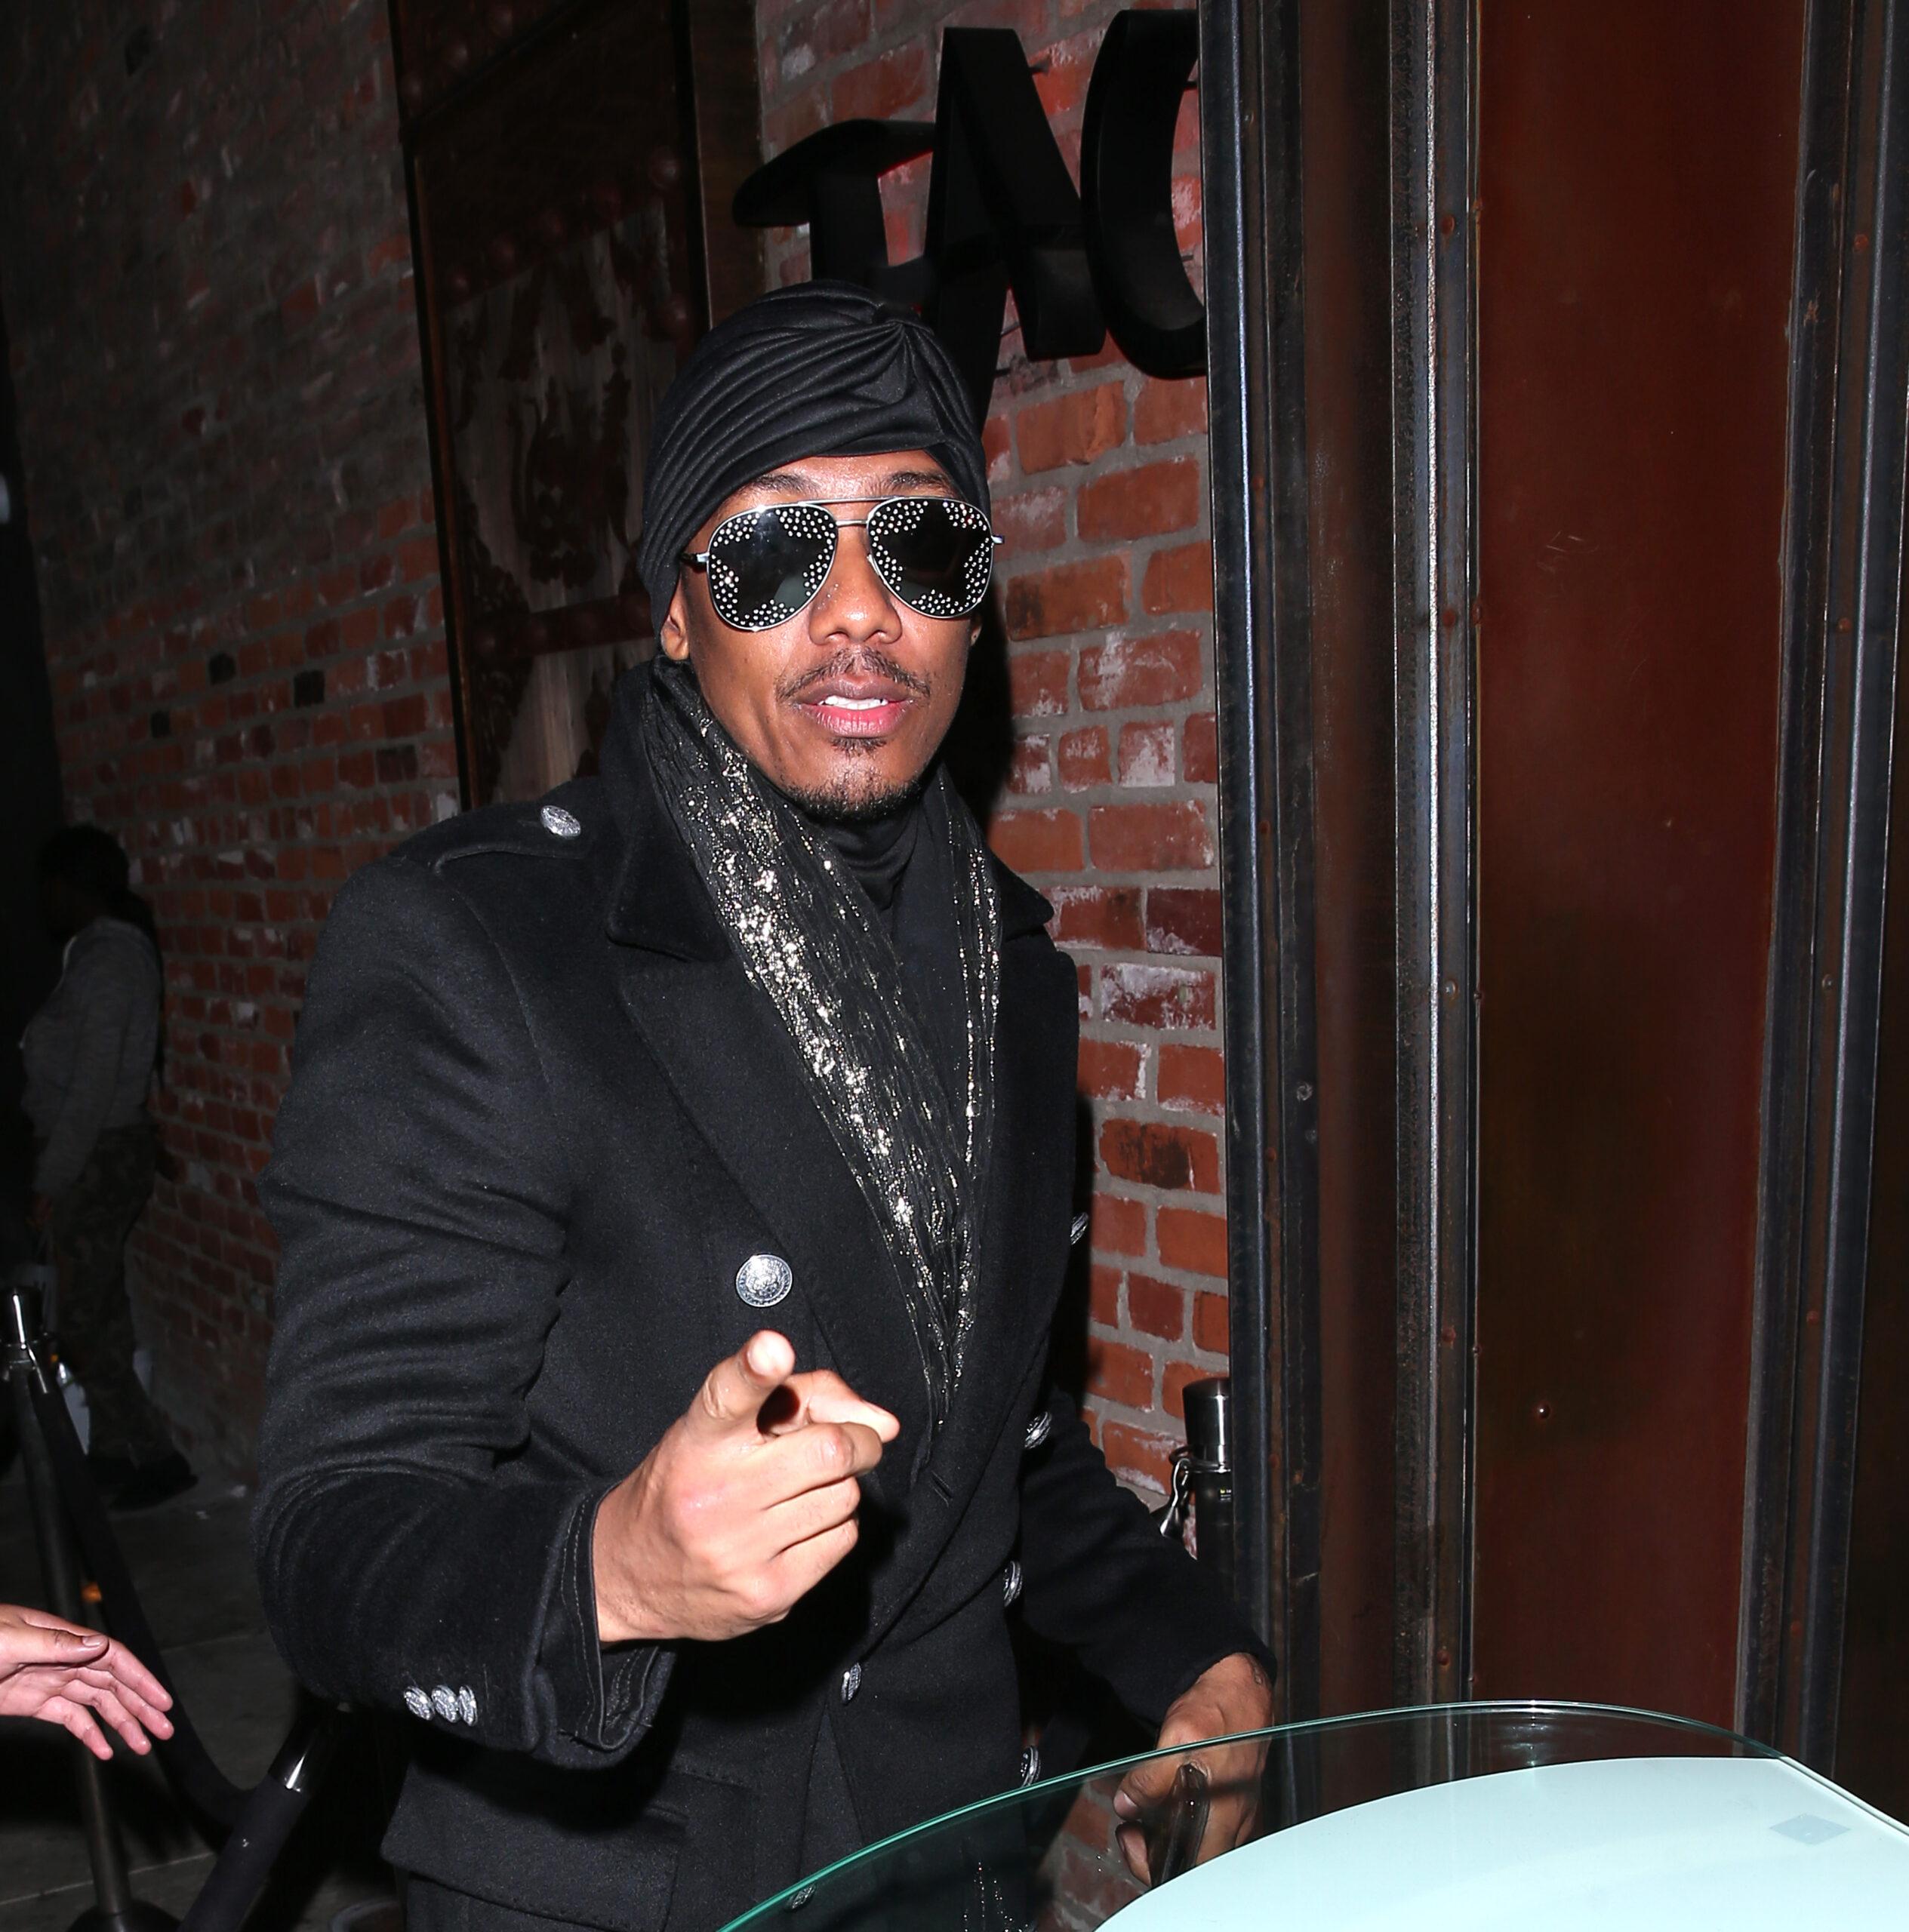 Nick Cannon was seen arriving to Kevin Harts Birthday Party at 'TAO' Restaurant in Hollywood, CA. 07 Jul 2019 Pictured: Nick Cannon. Photo credit: MEGA TheMegaAgency.com +1 888 505 6342 (Mega Agency TagID: MEGA460758_001.jpg) [Photo via Mega Agency]